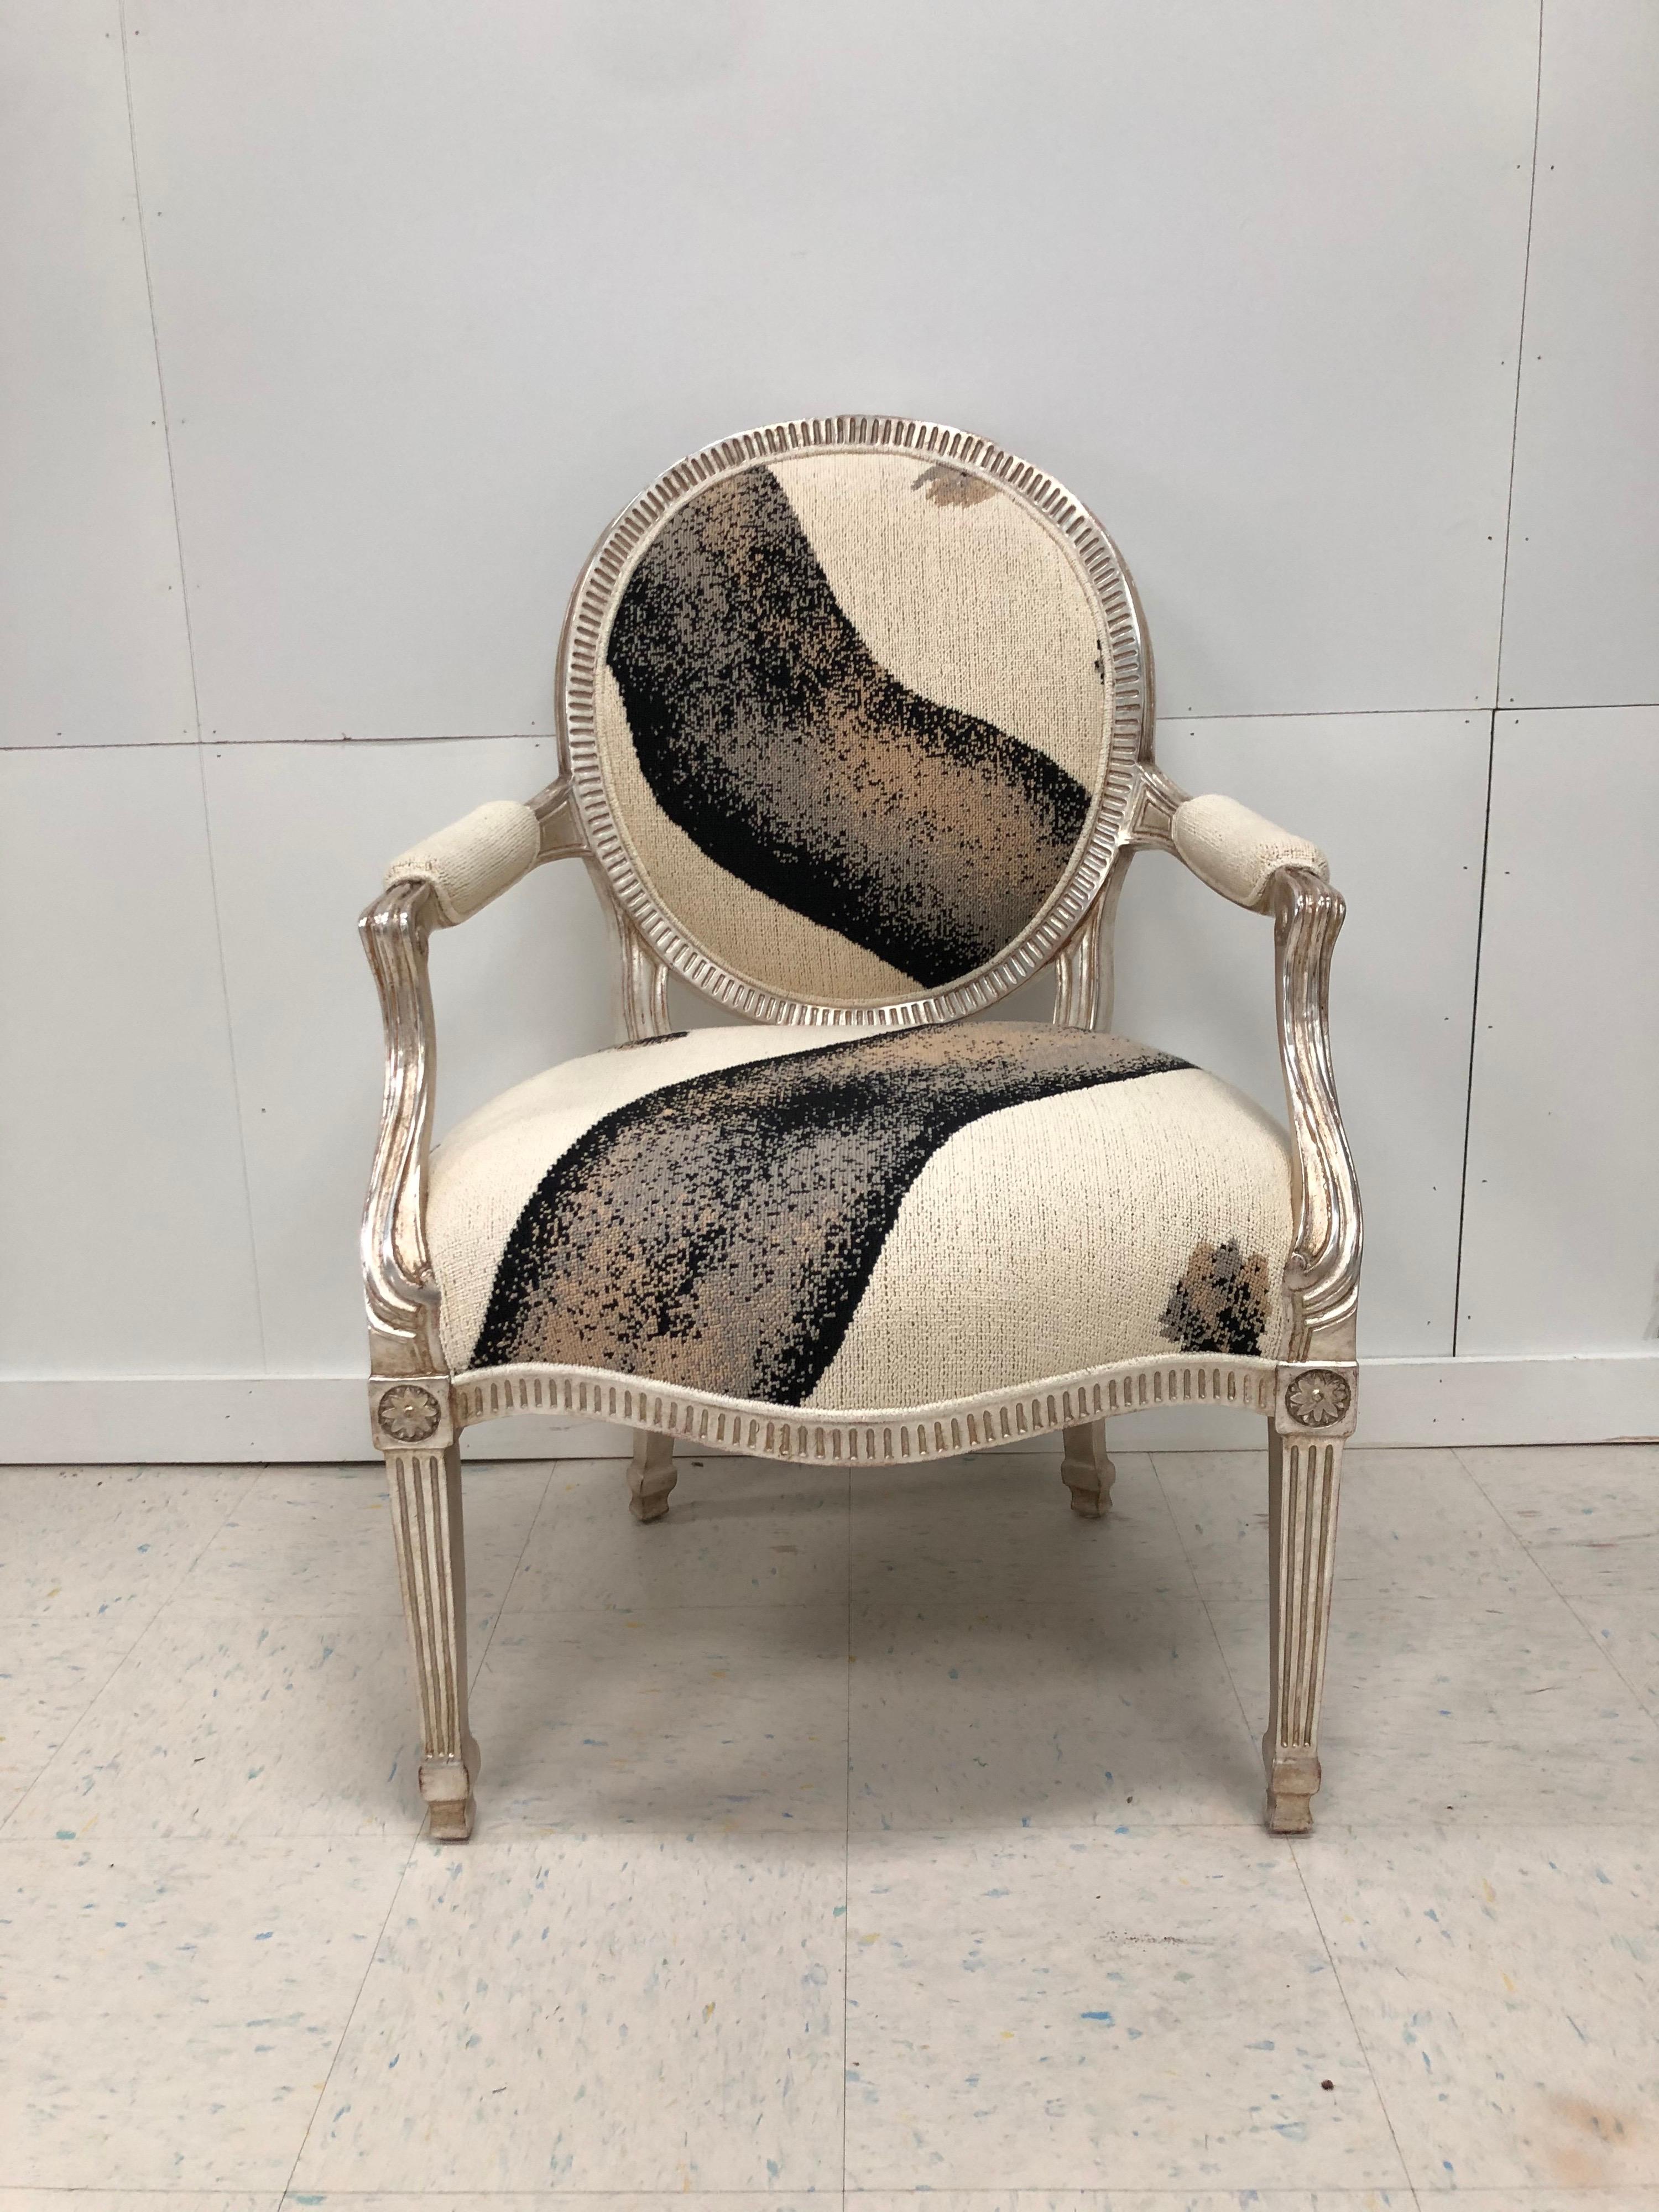 Custom upholstery on J. Robert Scott chairs with silver gilt. The pair are in good condition.